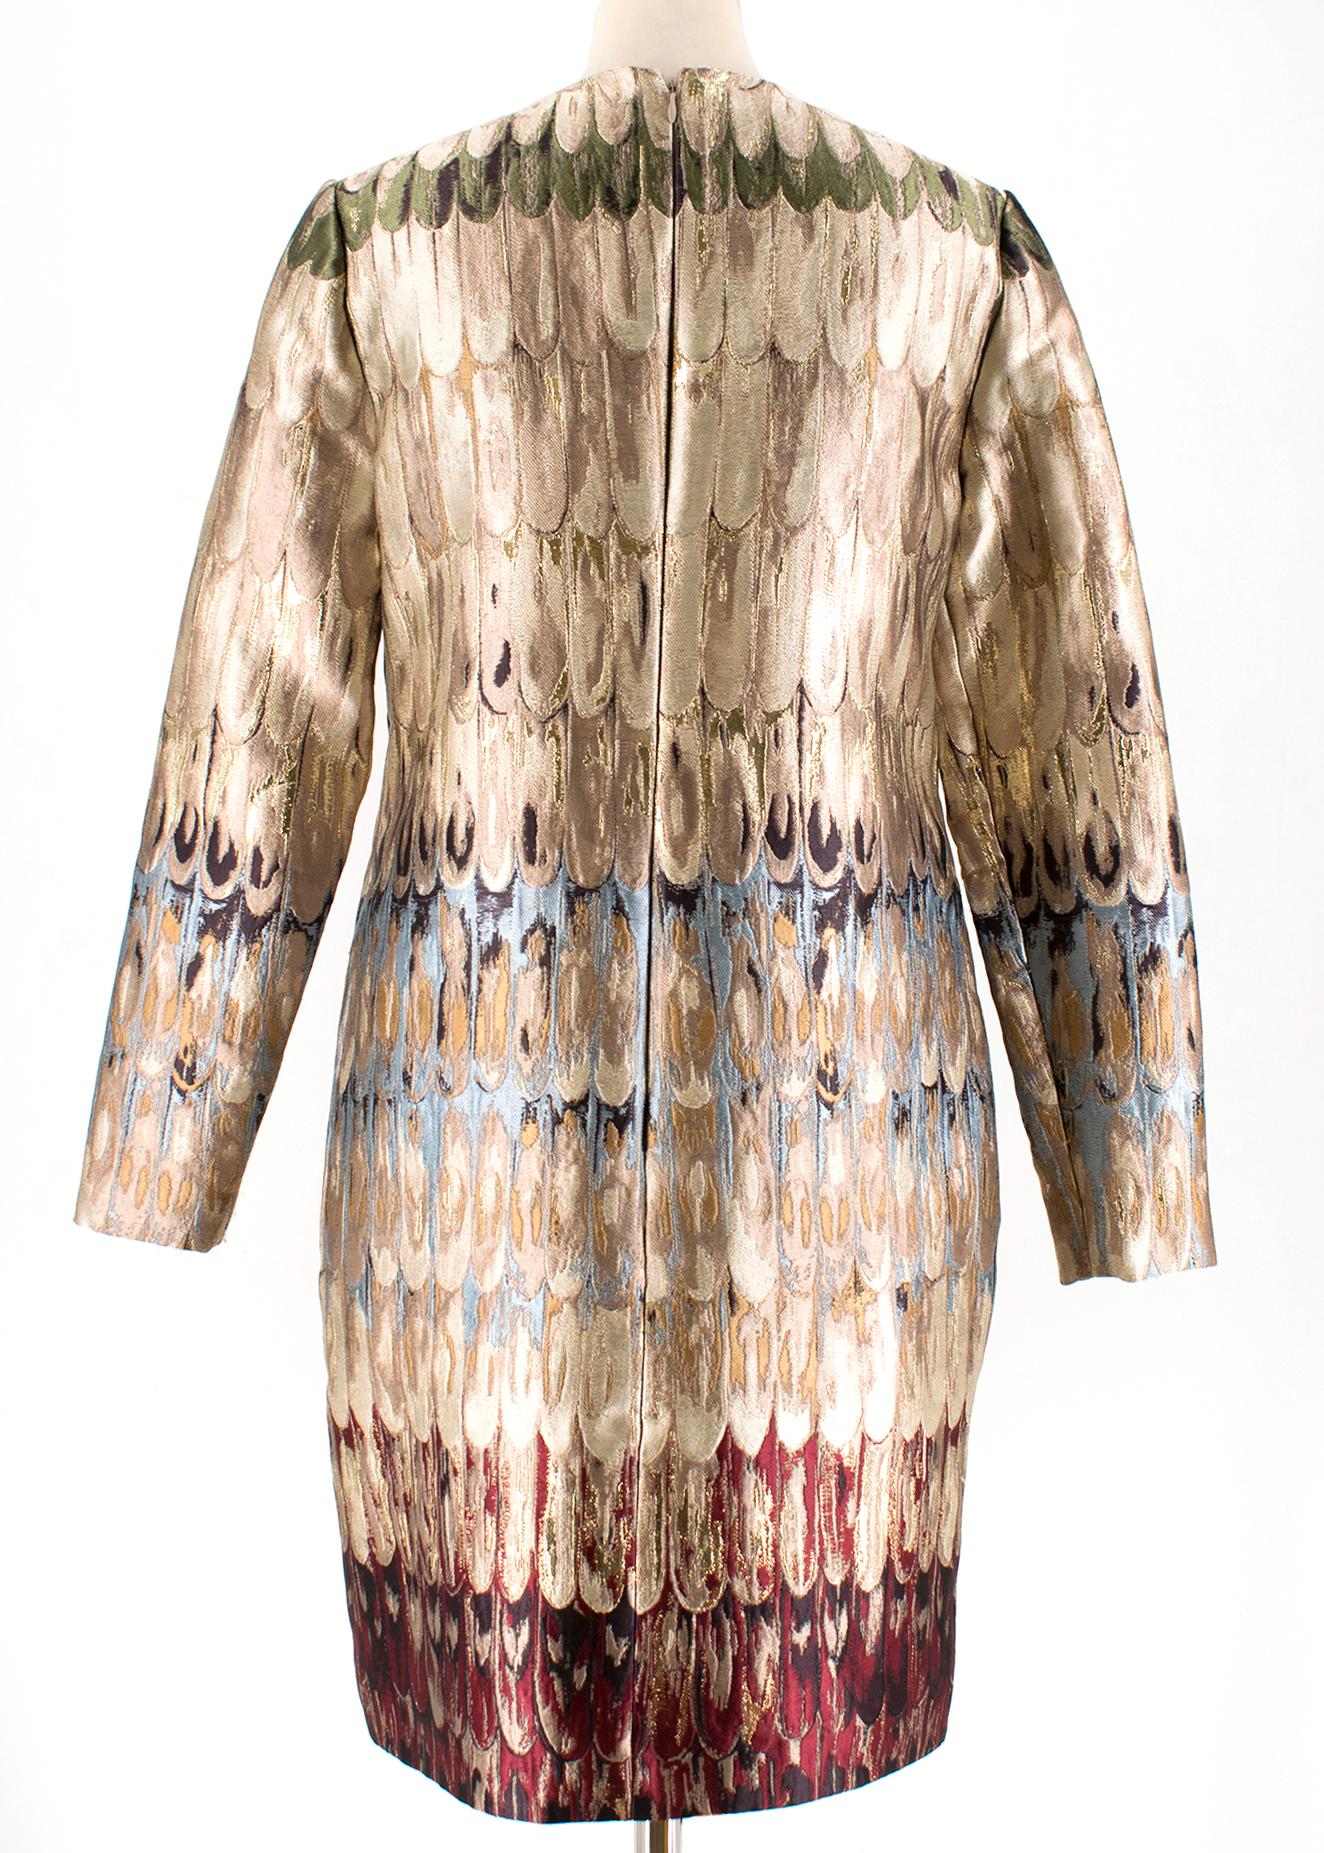 Valentino 'Feathered Colour' Shift Dress - Size US 8 4